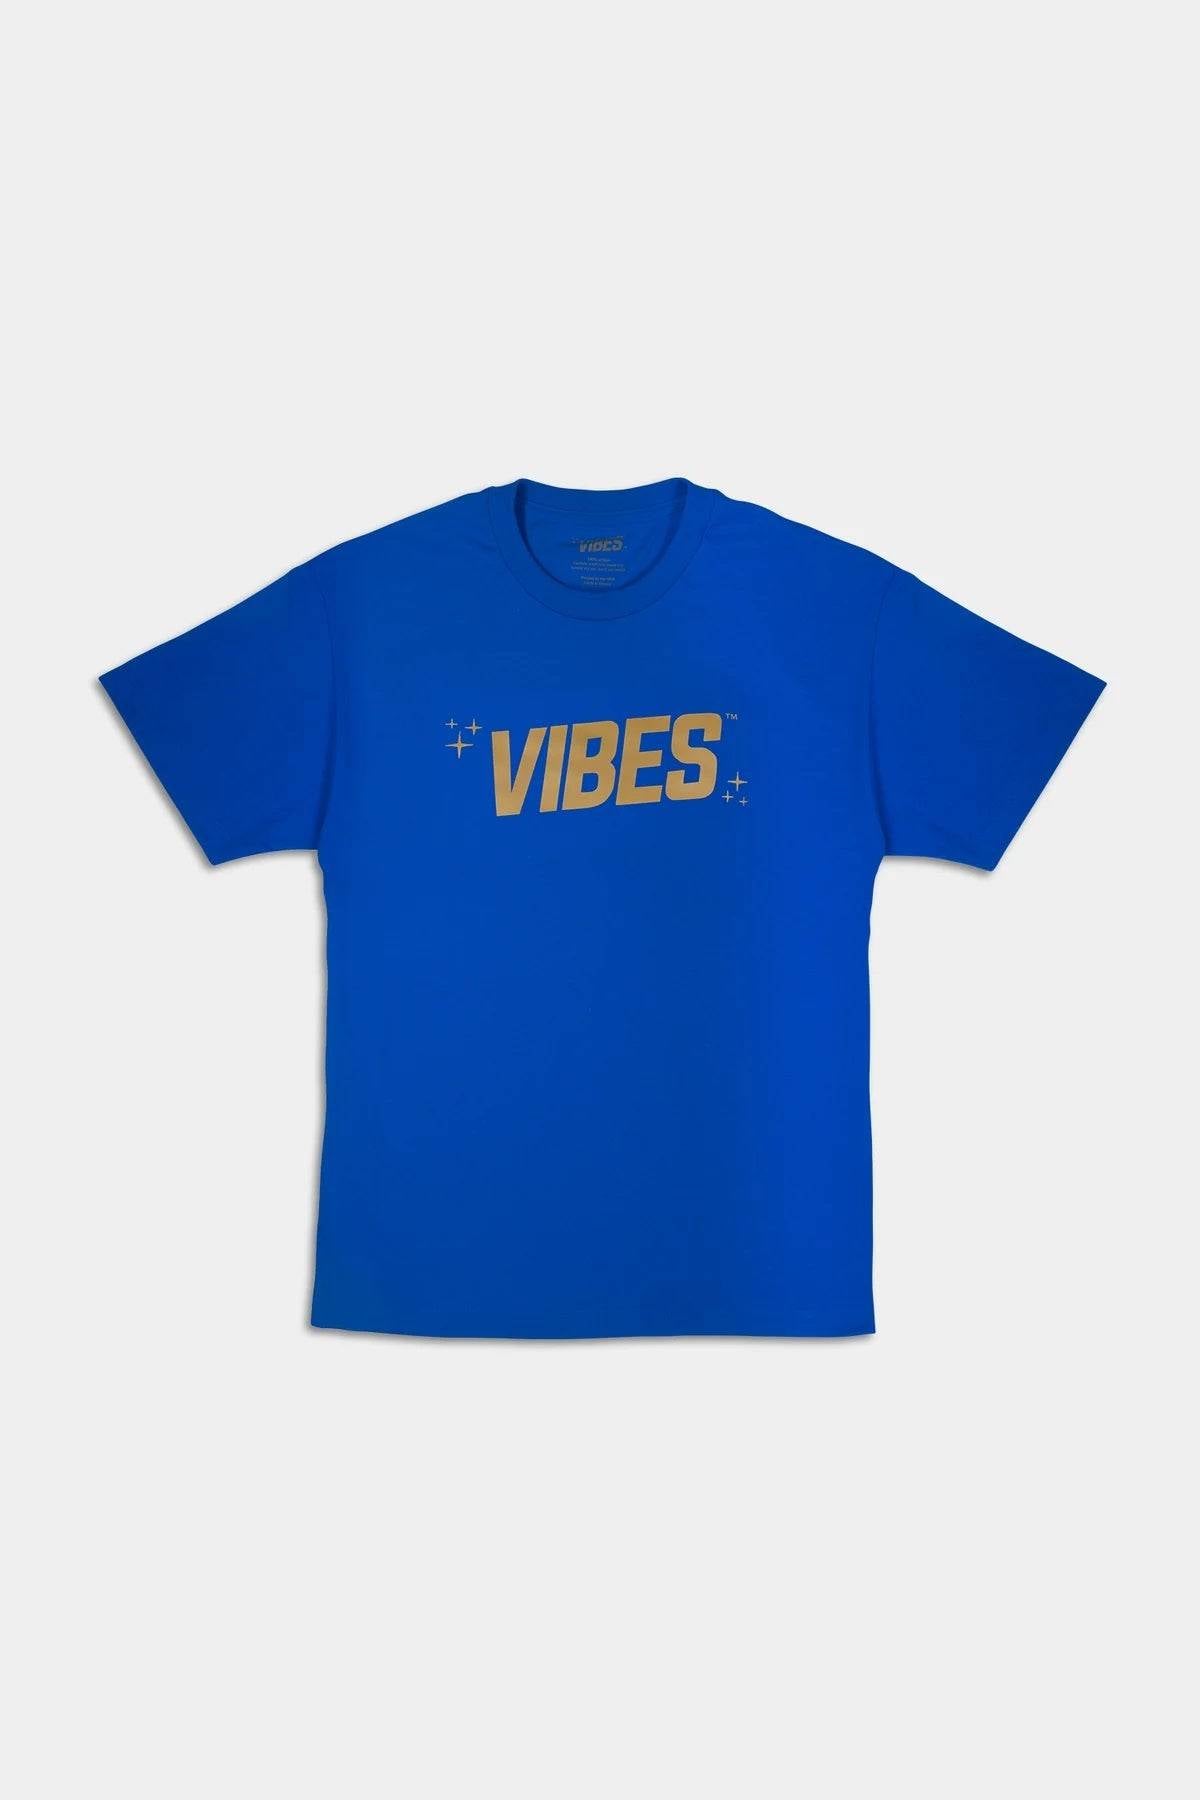 VIBES Blue With Gold Logo T-Shirt 3X-Large